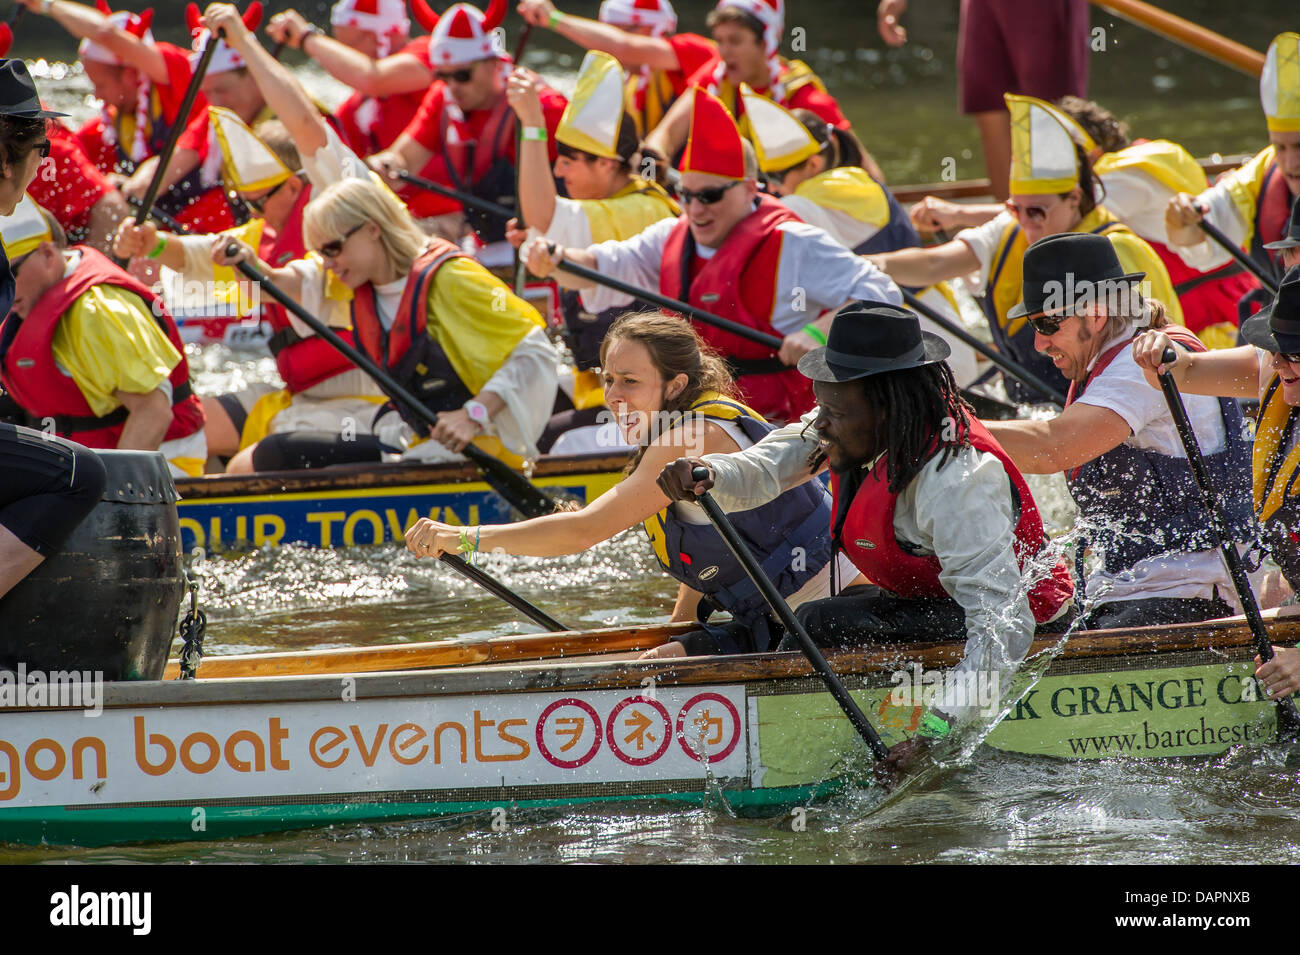 Pain effort at the start of a race at the 2013 Rotary Club Chinese Dragon Boat event on the River Ouse in York, UK. Crews teams Stock Photo